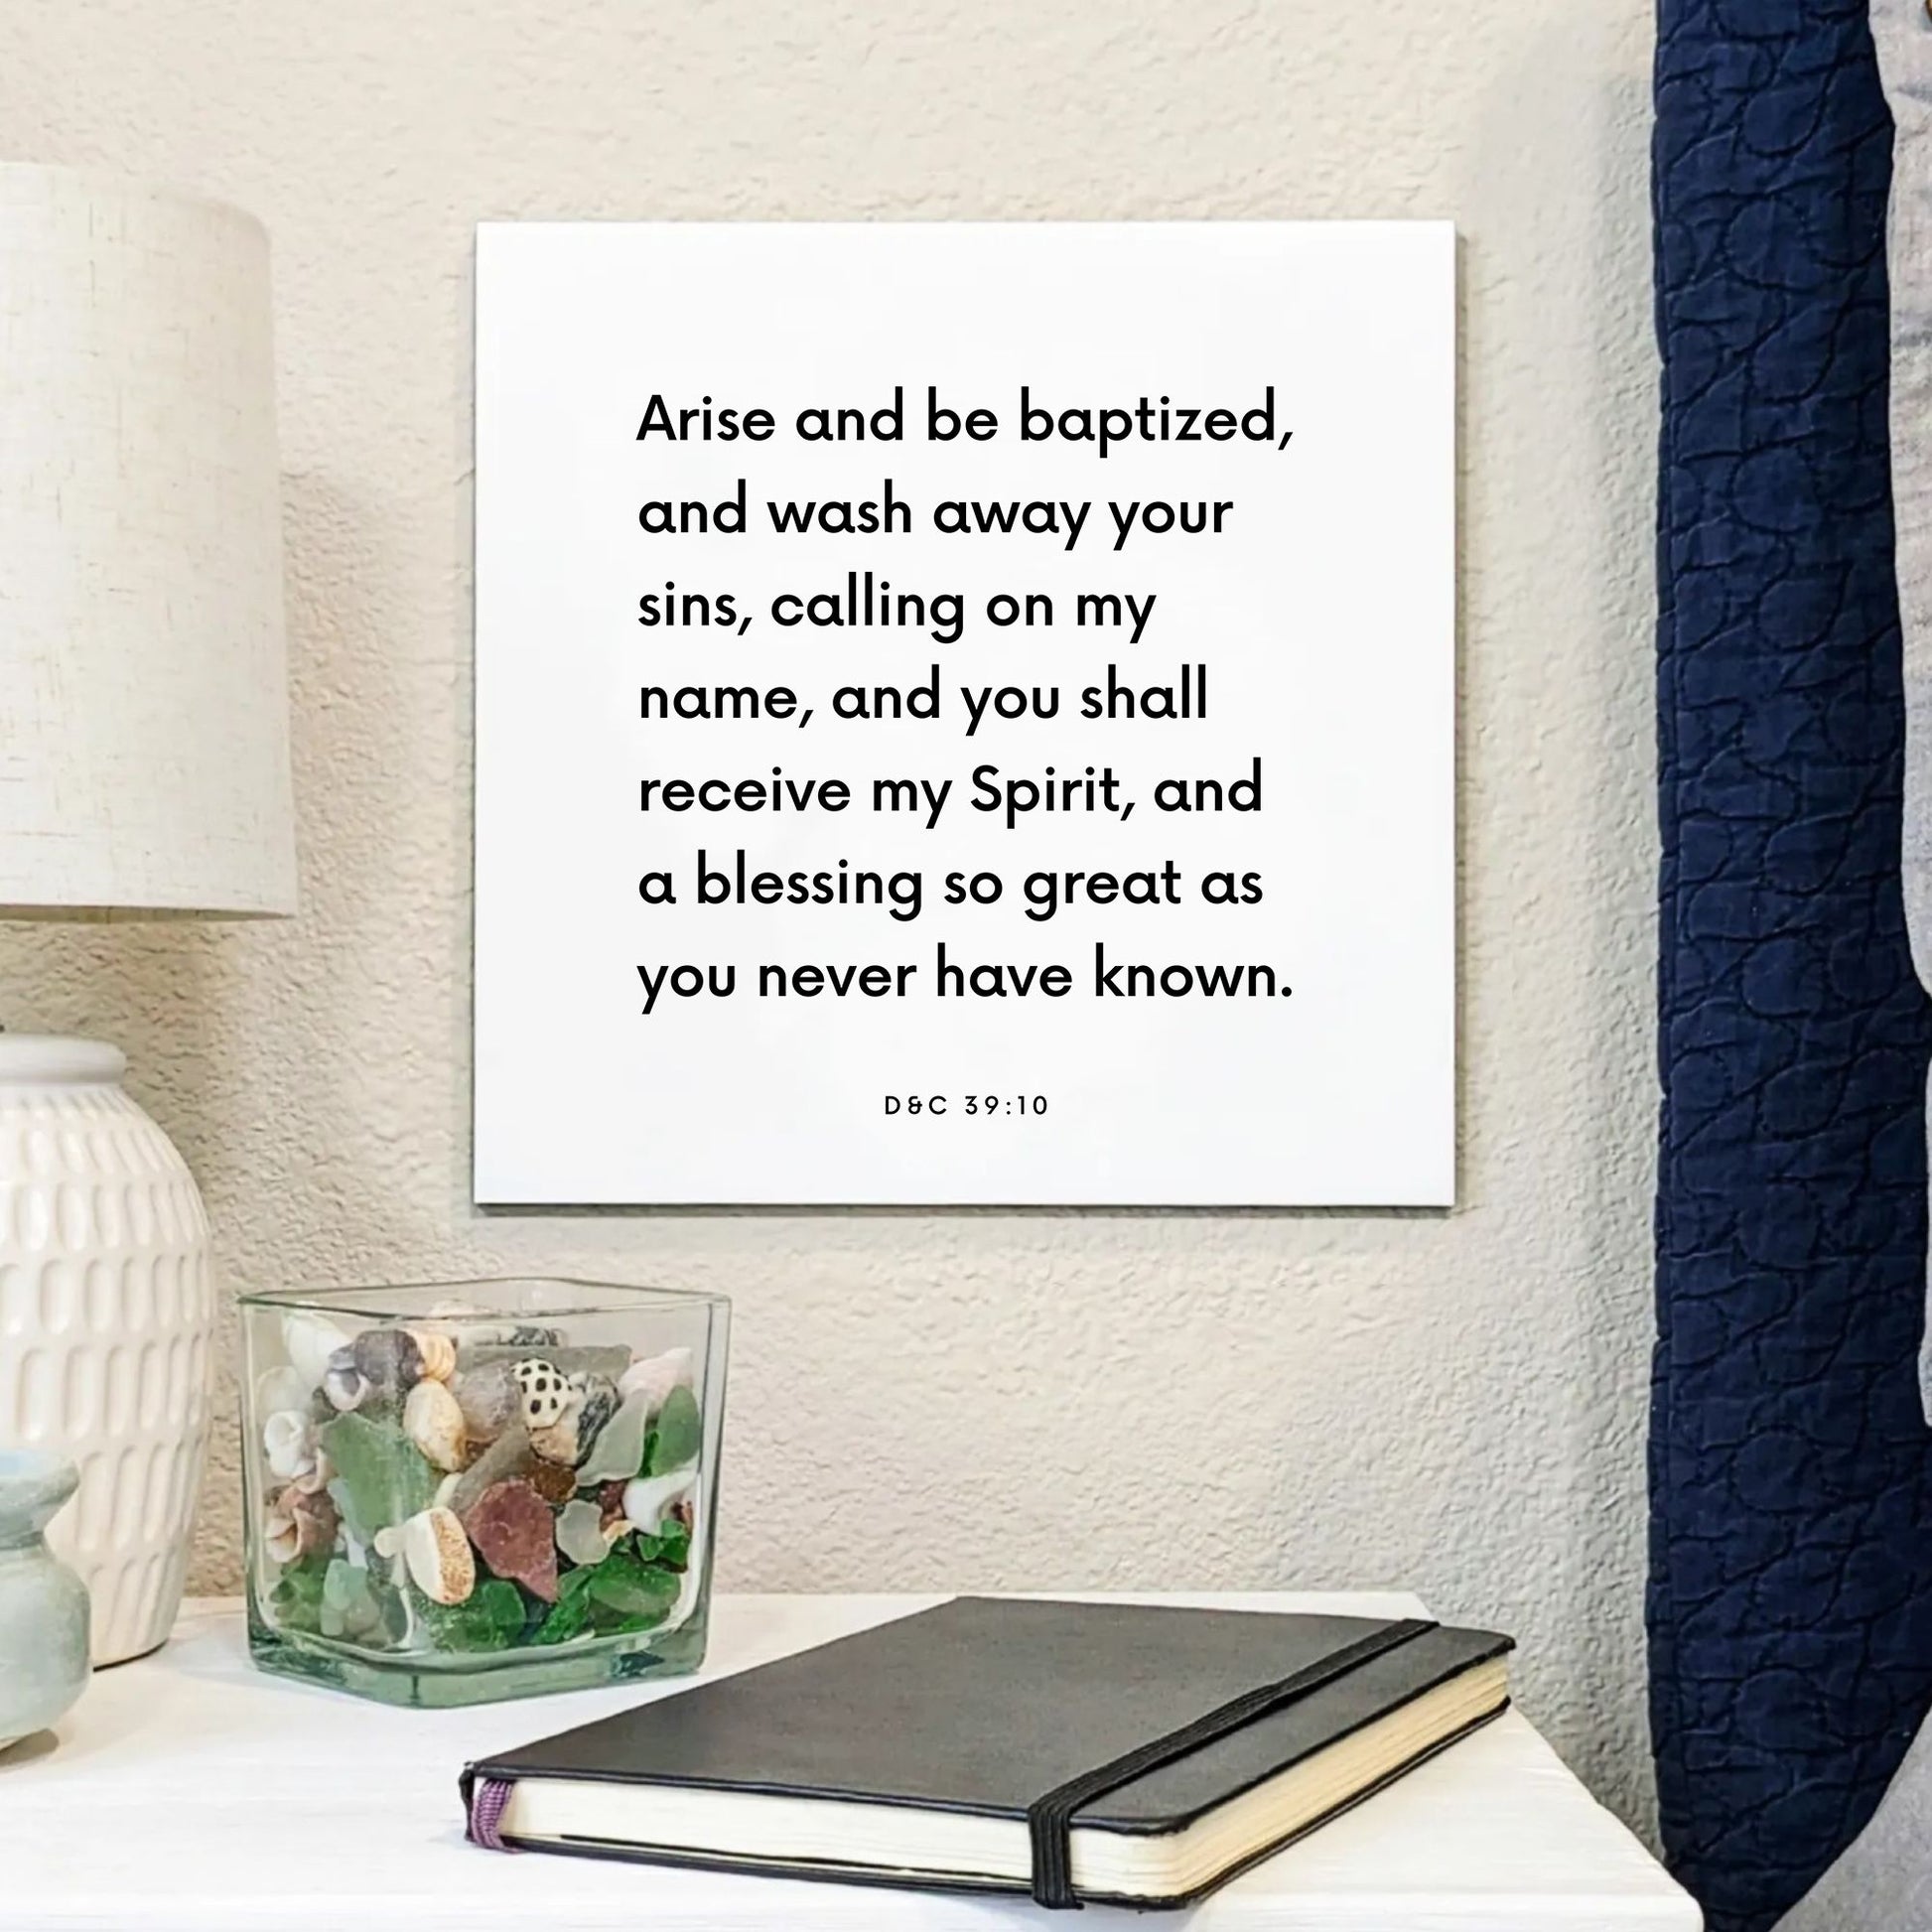 Bedside mouting of the scripture tile for D&C 39:10 - "Arise and be baptized, and wash away your sins"